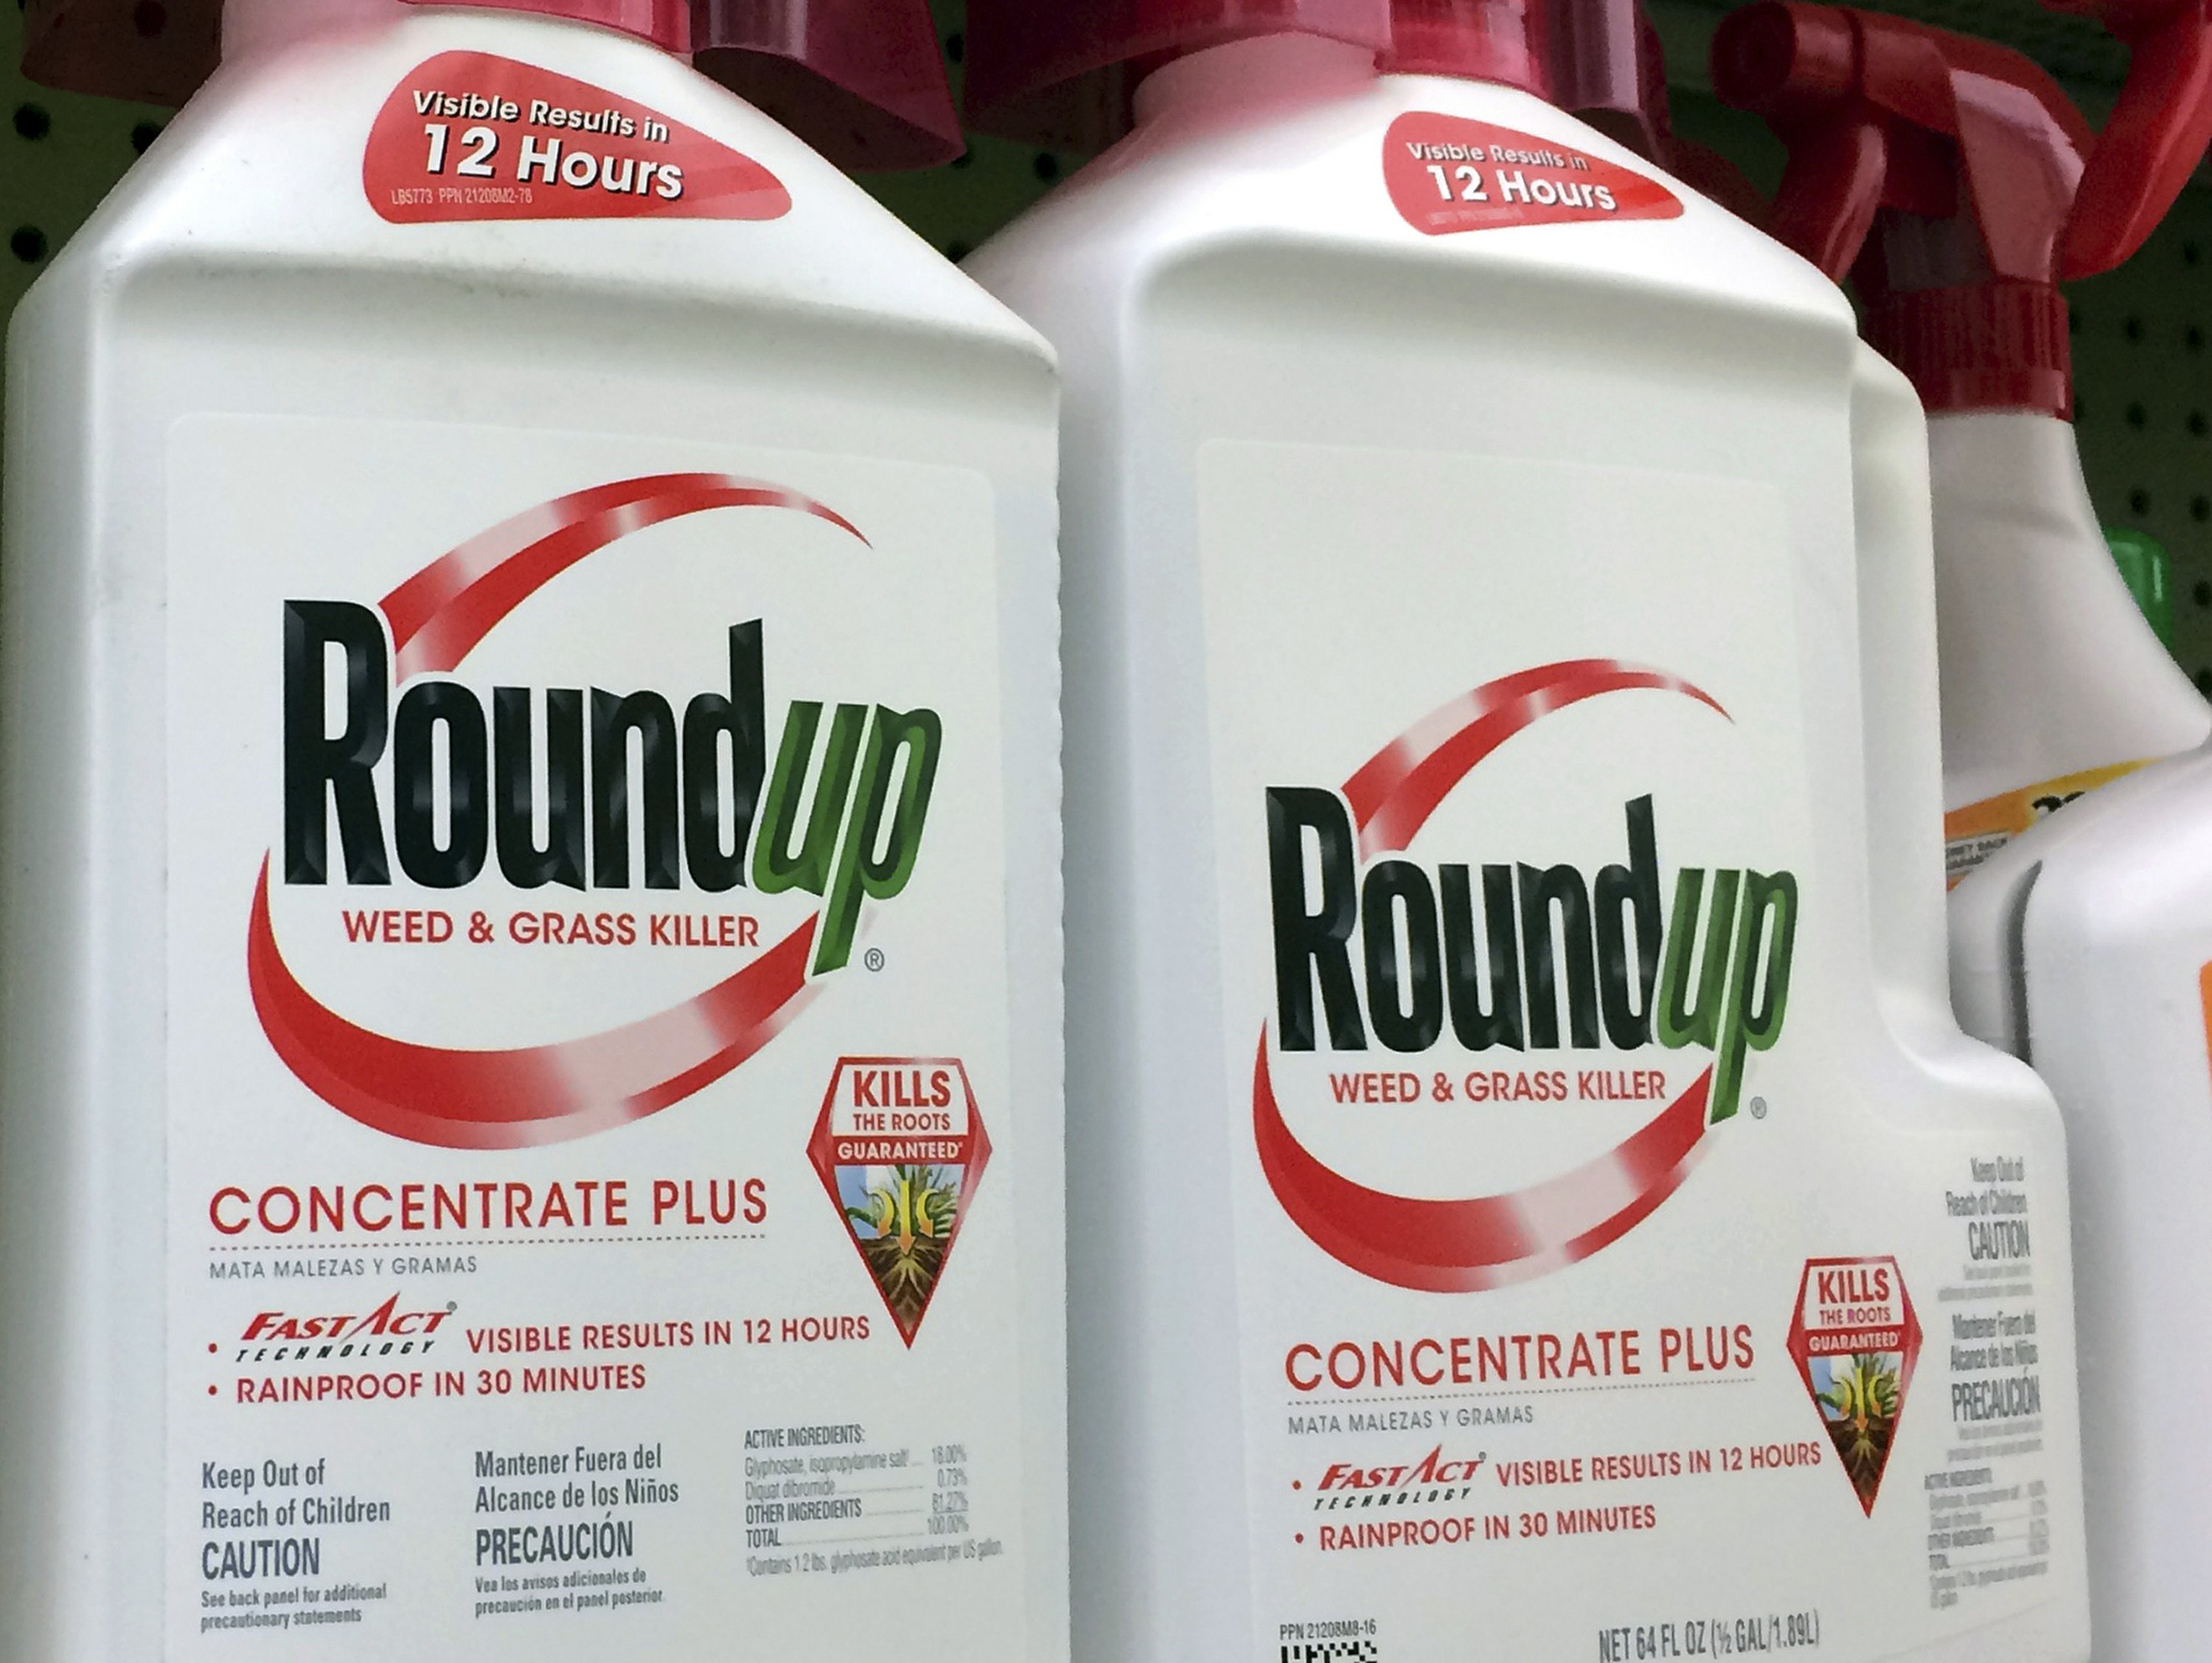 Lawsuits alleging Roundup caused cancer can move forward | AP News